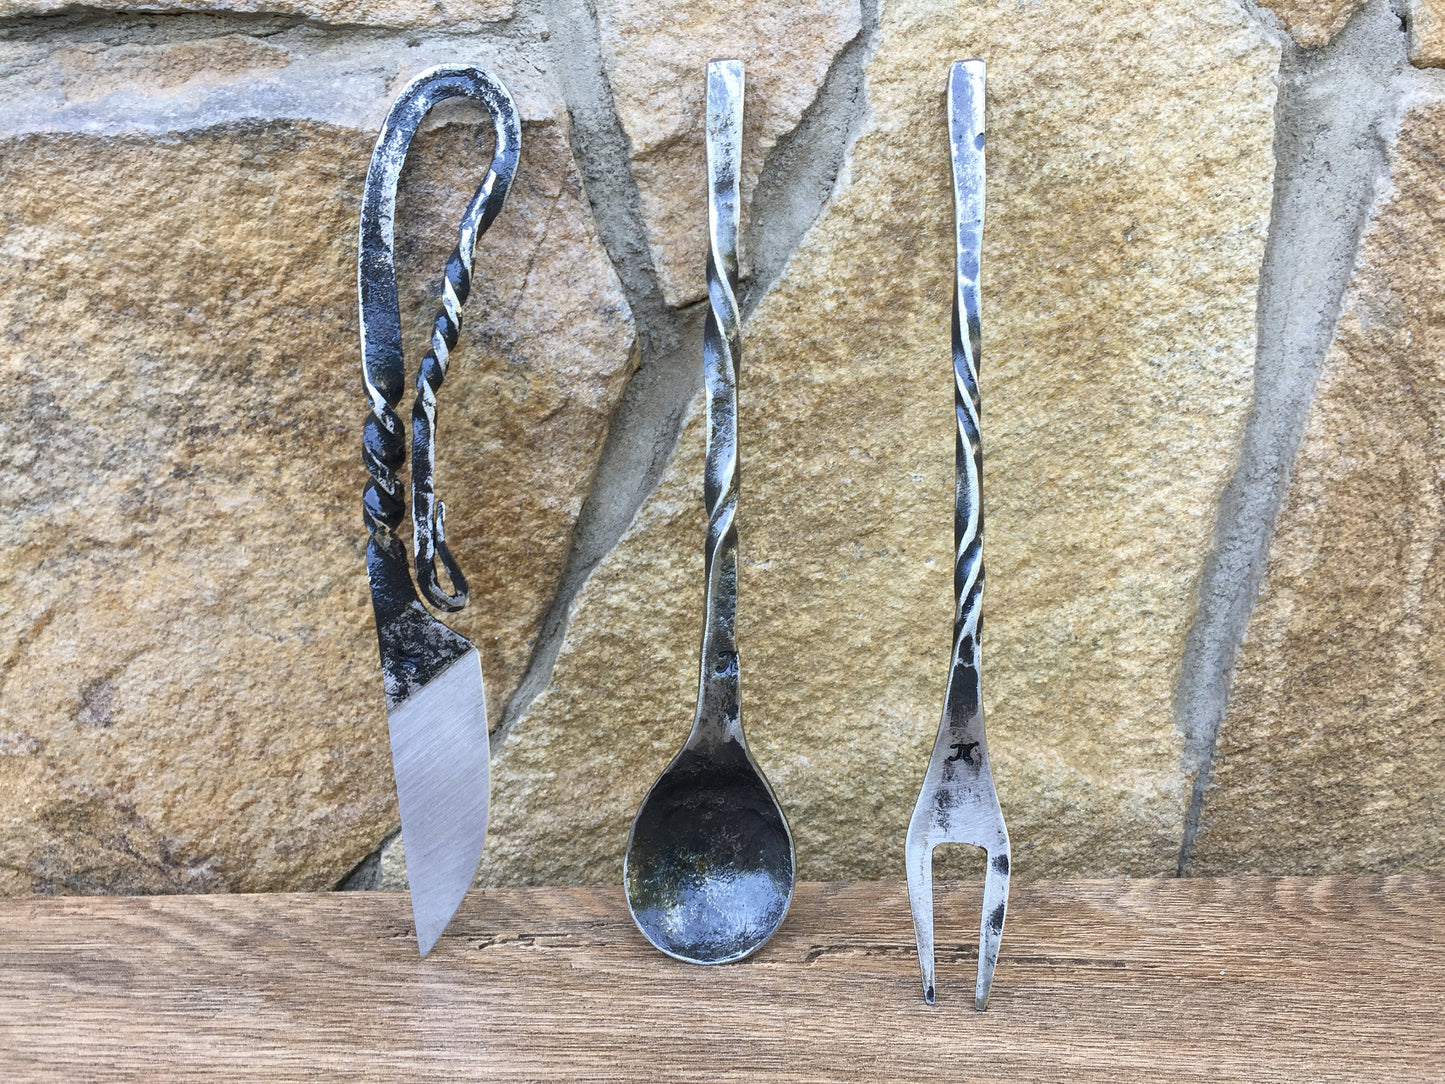 Medieval cutlery, knife, spoon, skewer, middle ages cutlery, camp equipment, grill tools, forged flatware, dining set, viking, fork, kitchen